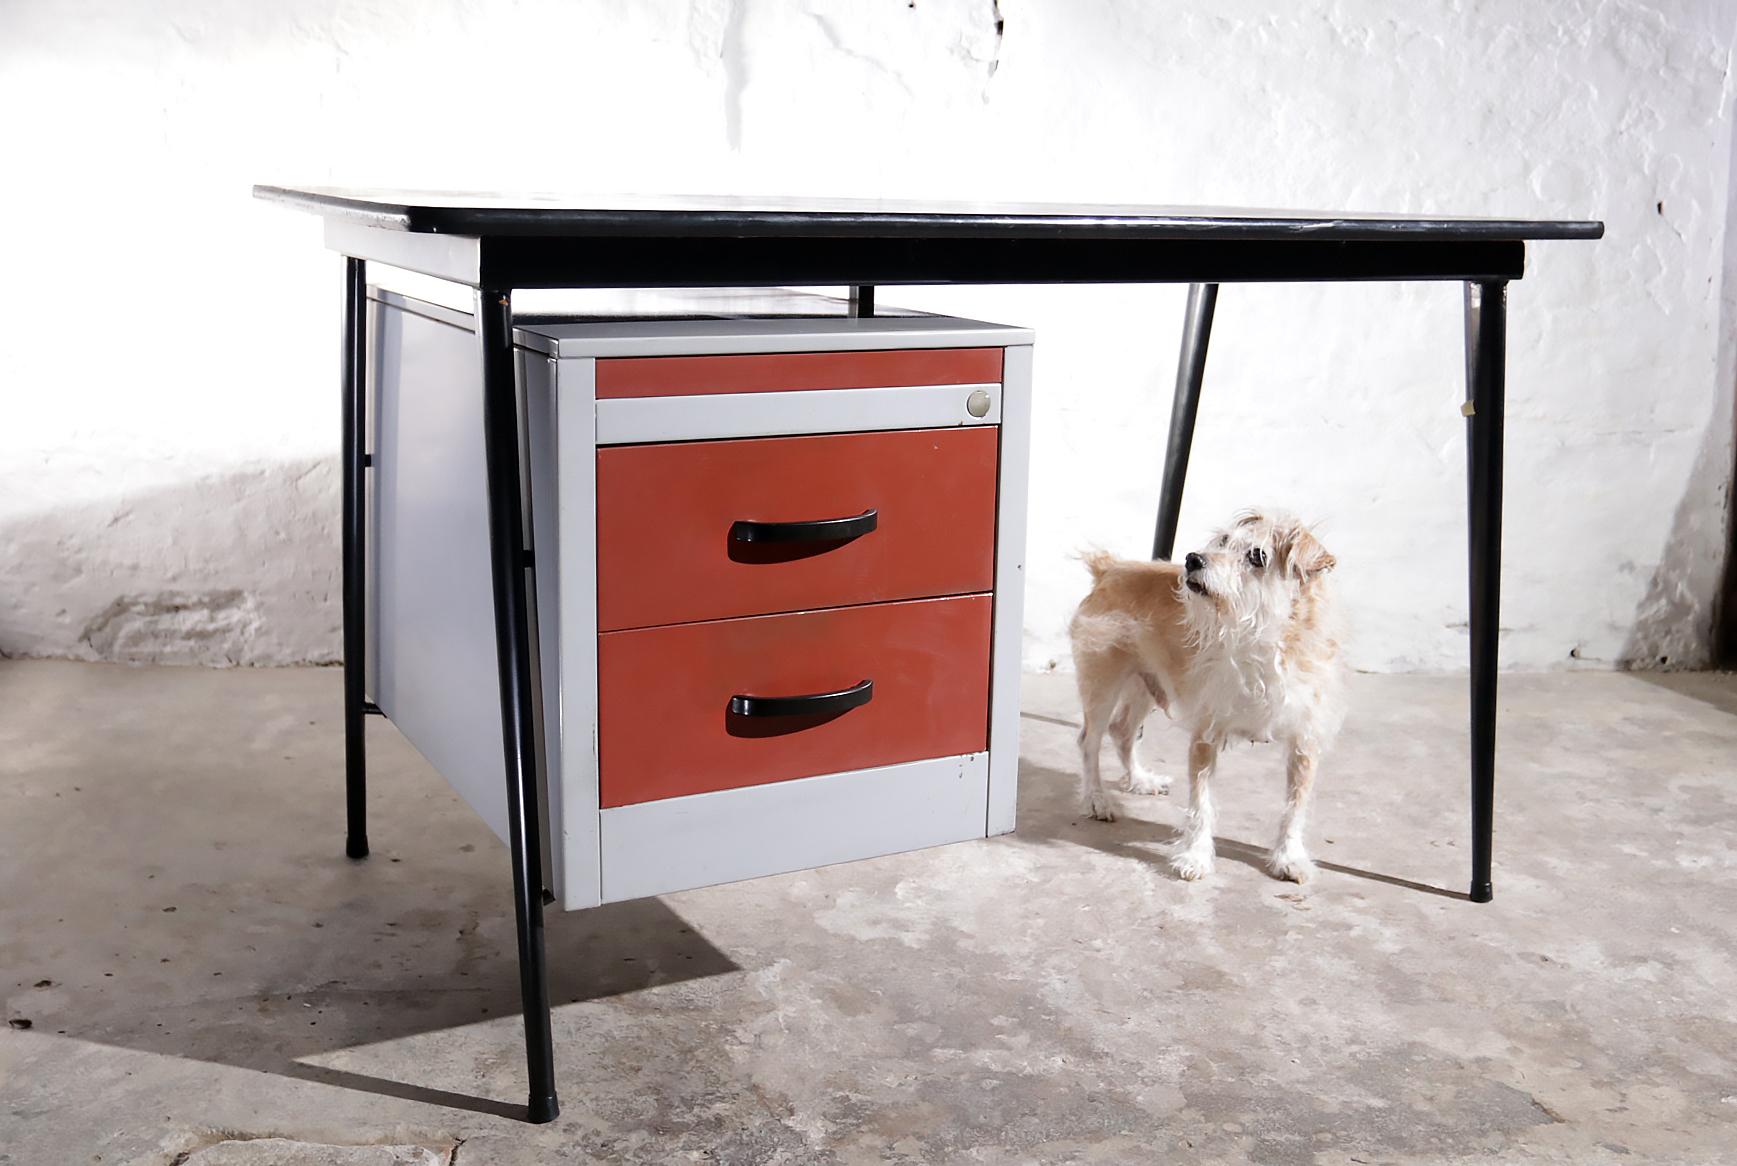 This (probably Dutch design) desk from the 1950s is made of metal with a beautiful sleek design.
The drawers were once painted red, the bottom one was originally yellow and the one above was light gray.
The tabletop is black linoleum with wear